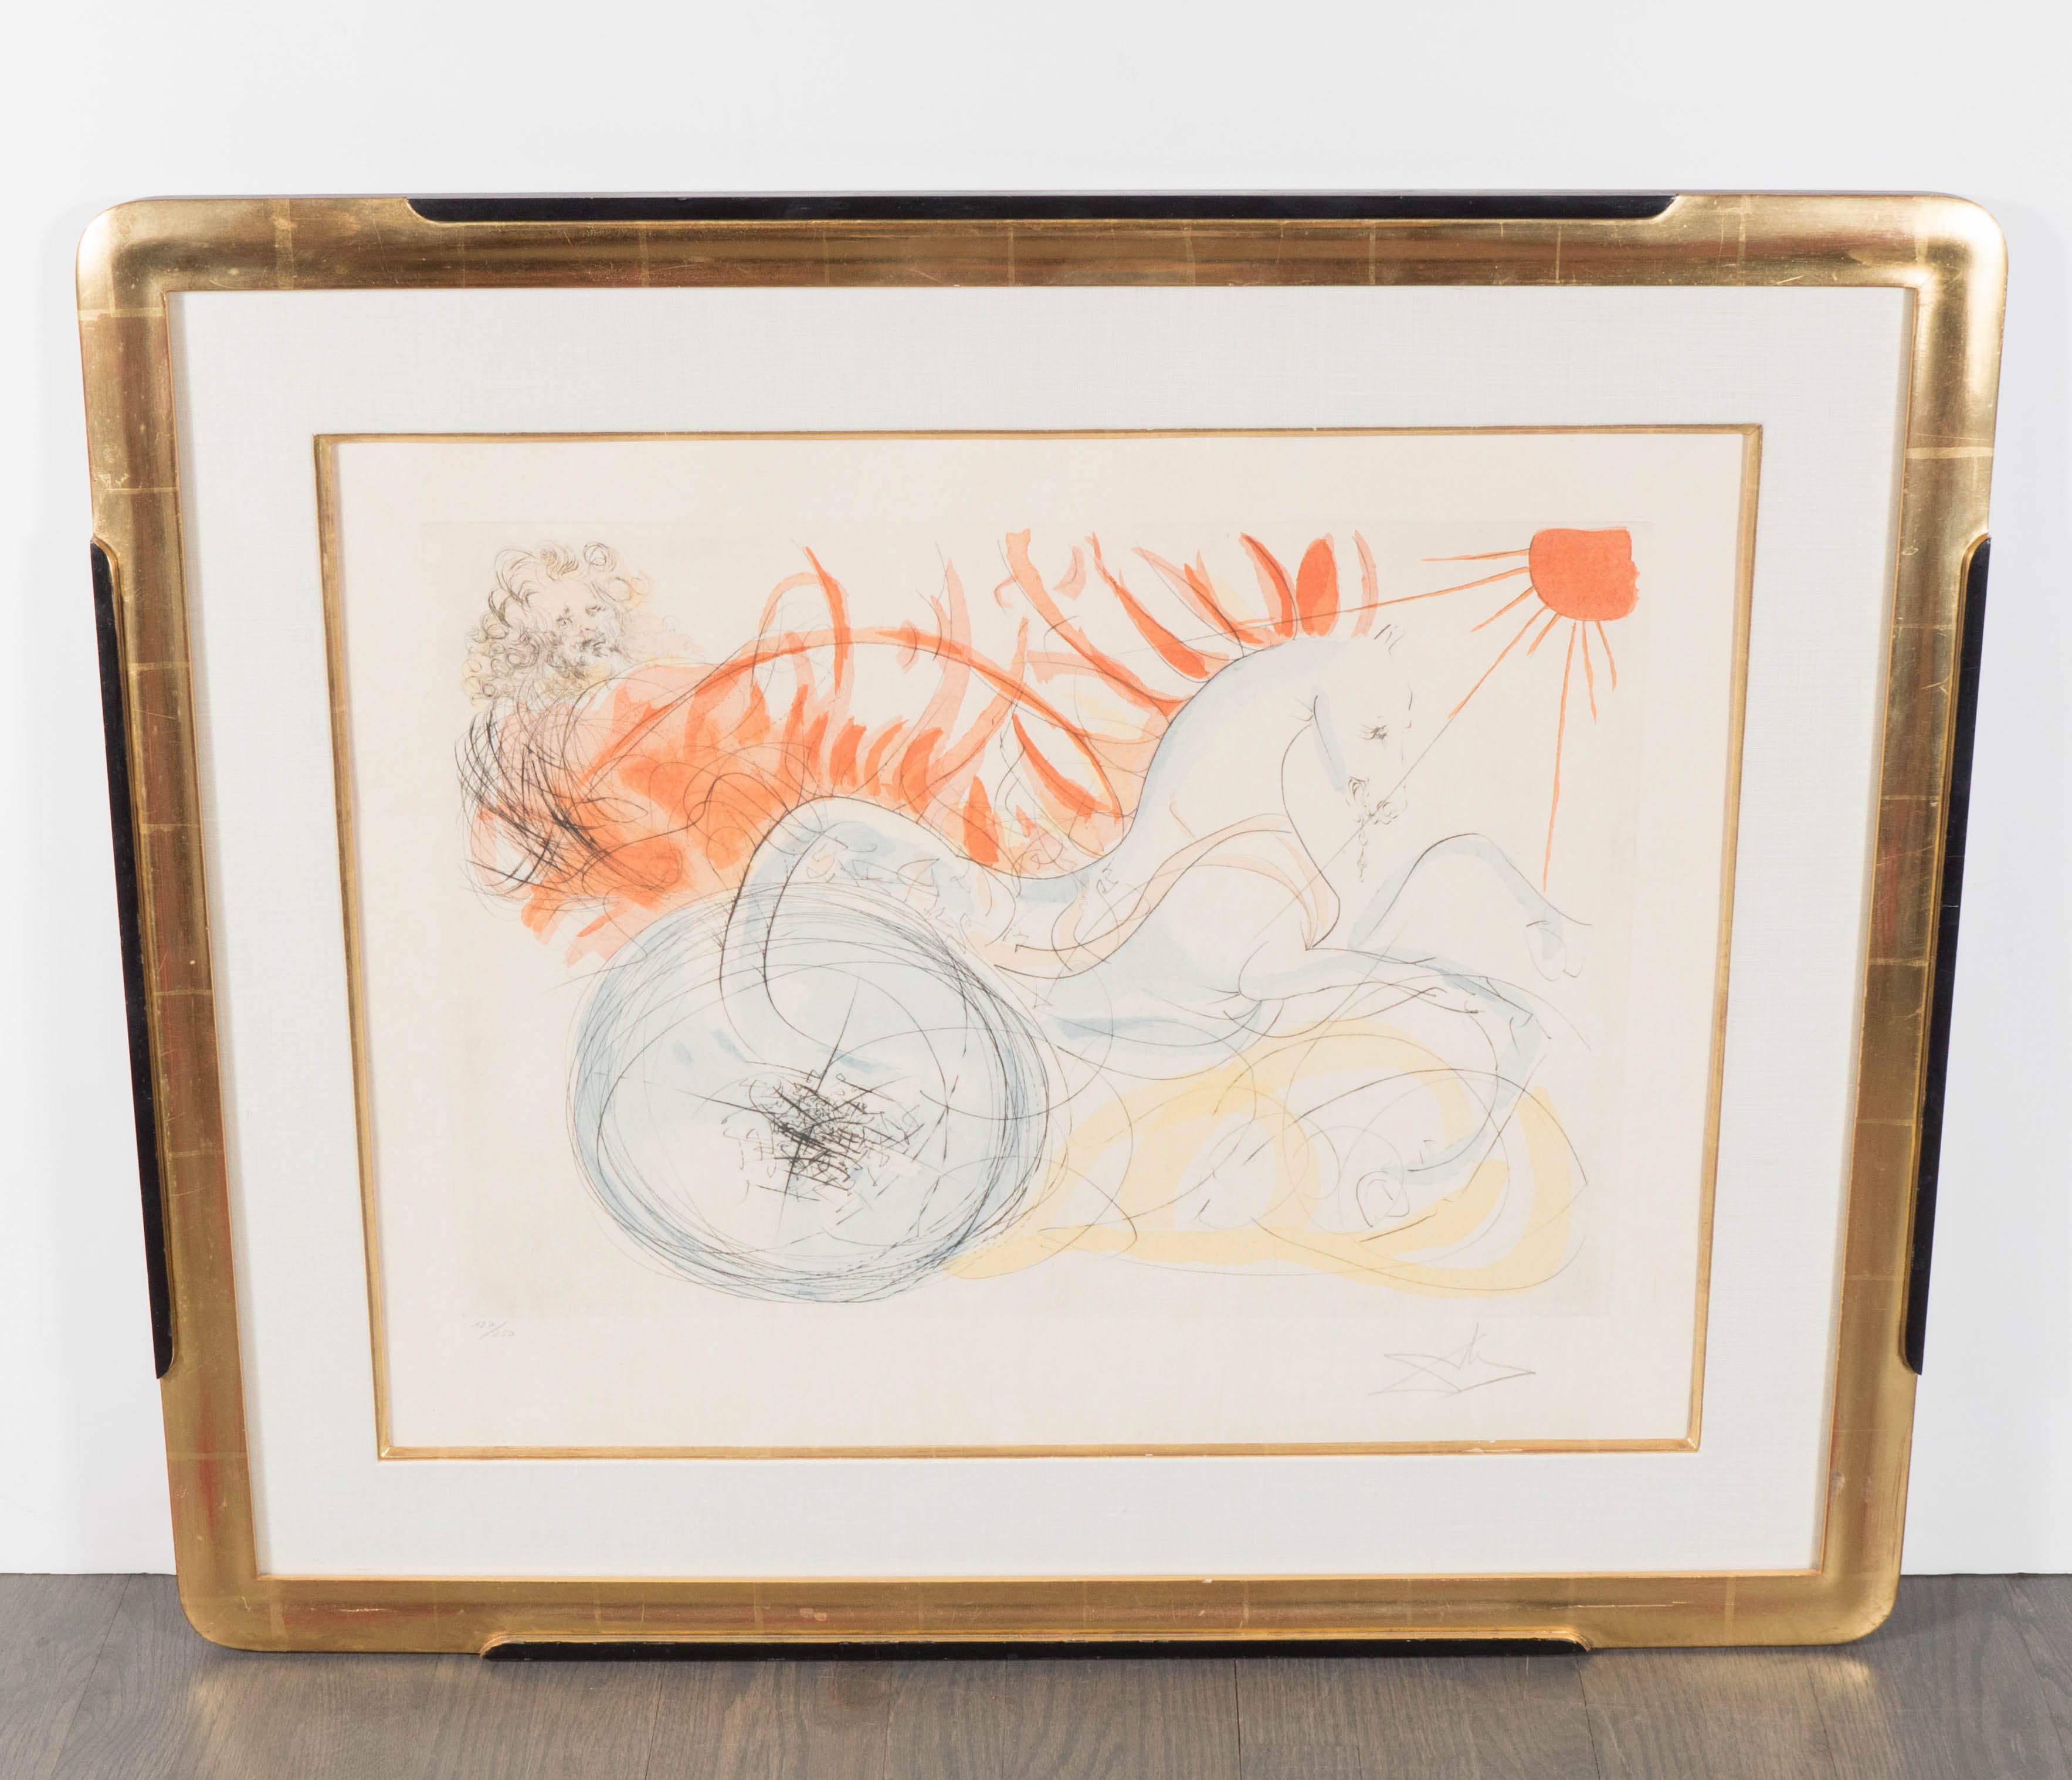 Original Etching with Hand Coloring by Salvador Dali "Elijah on His Chariot"